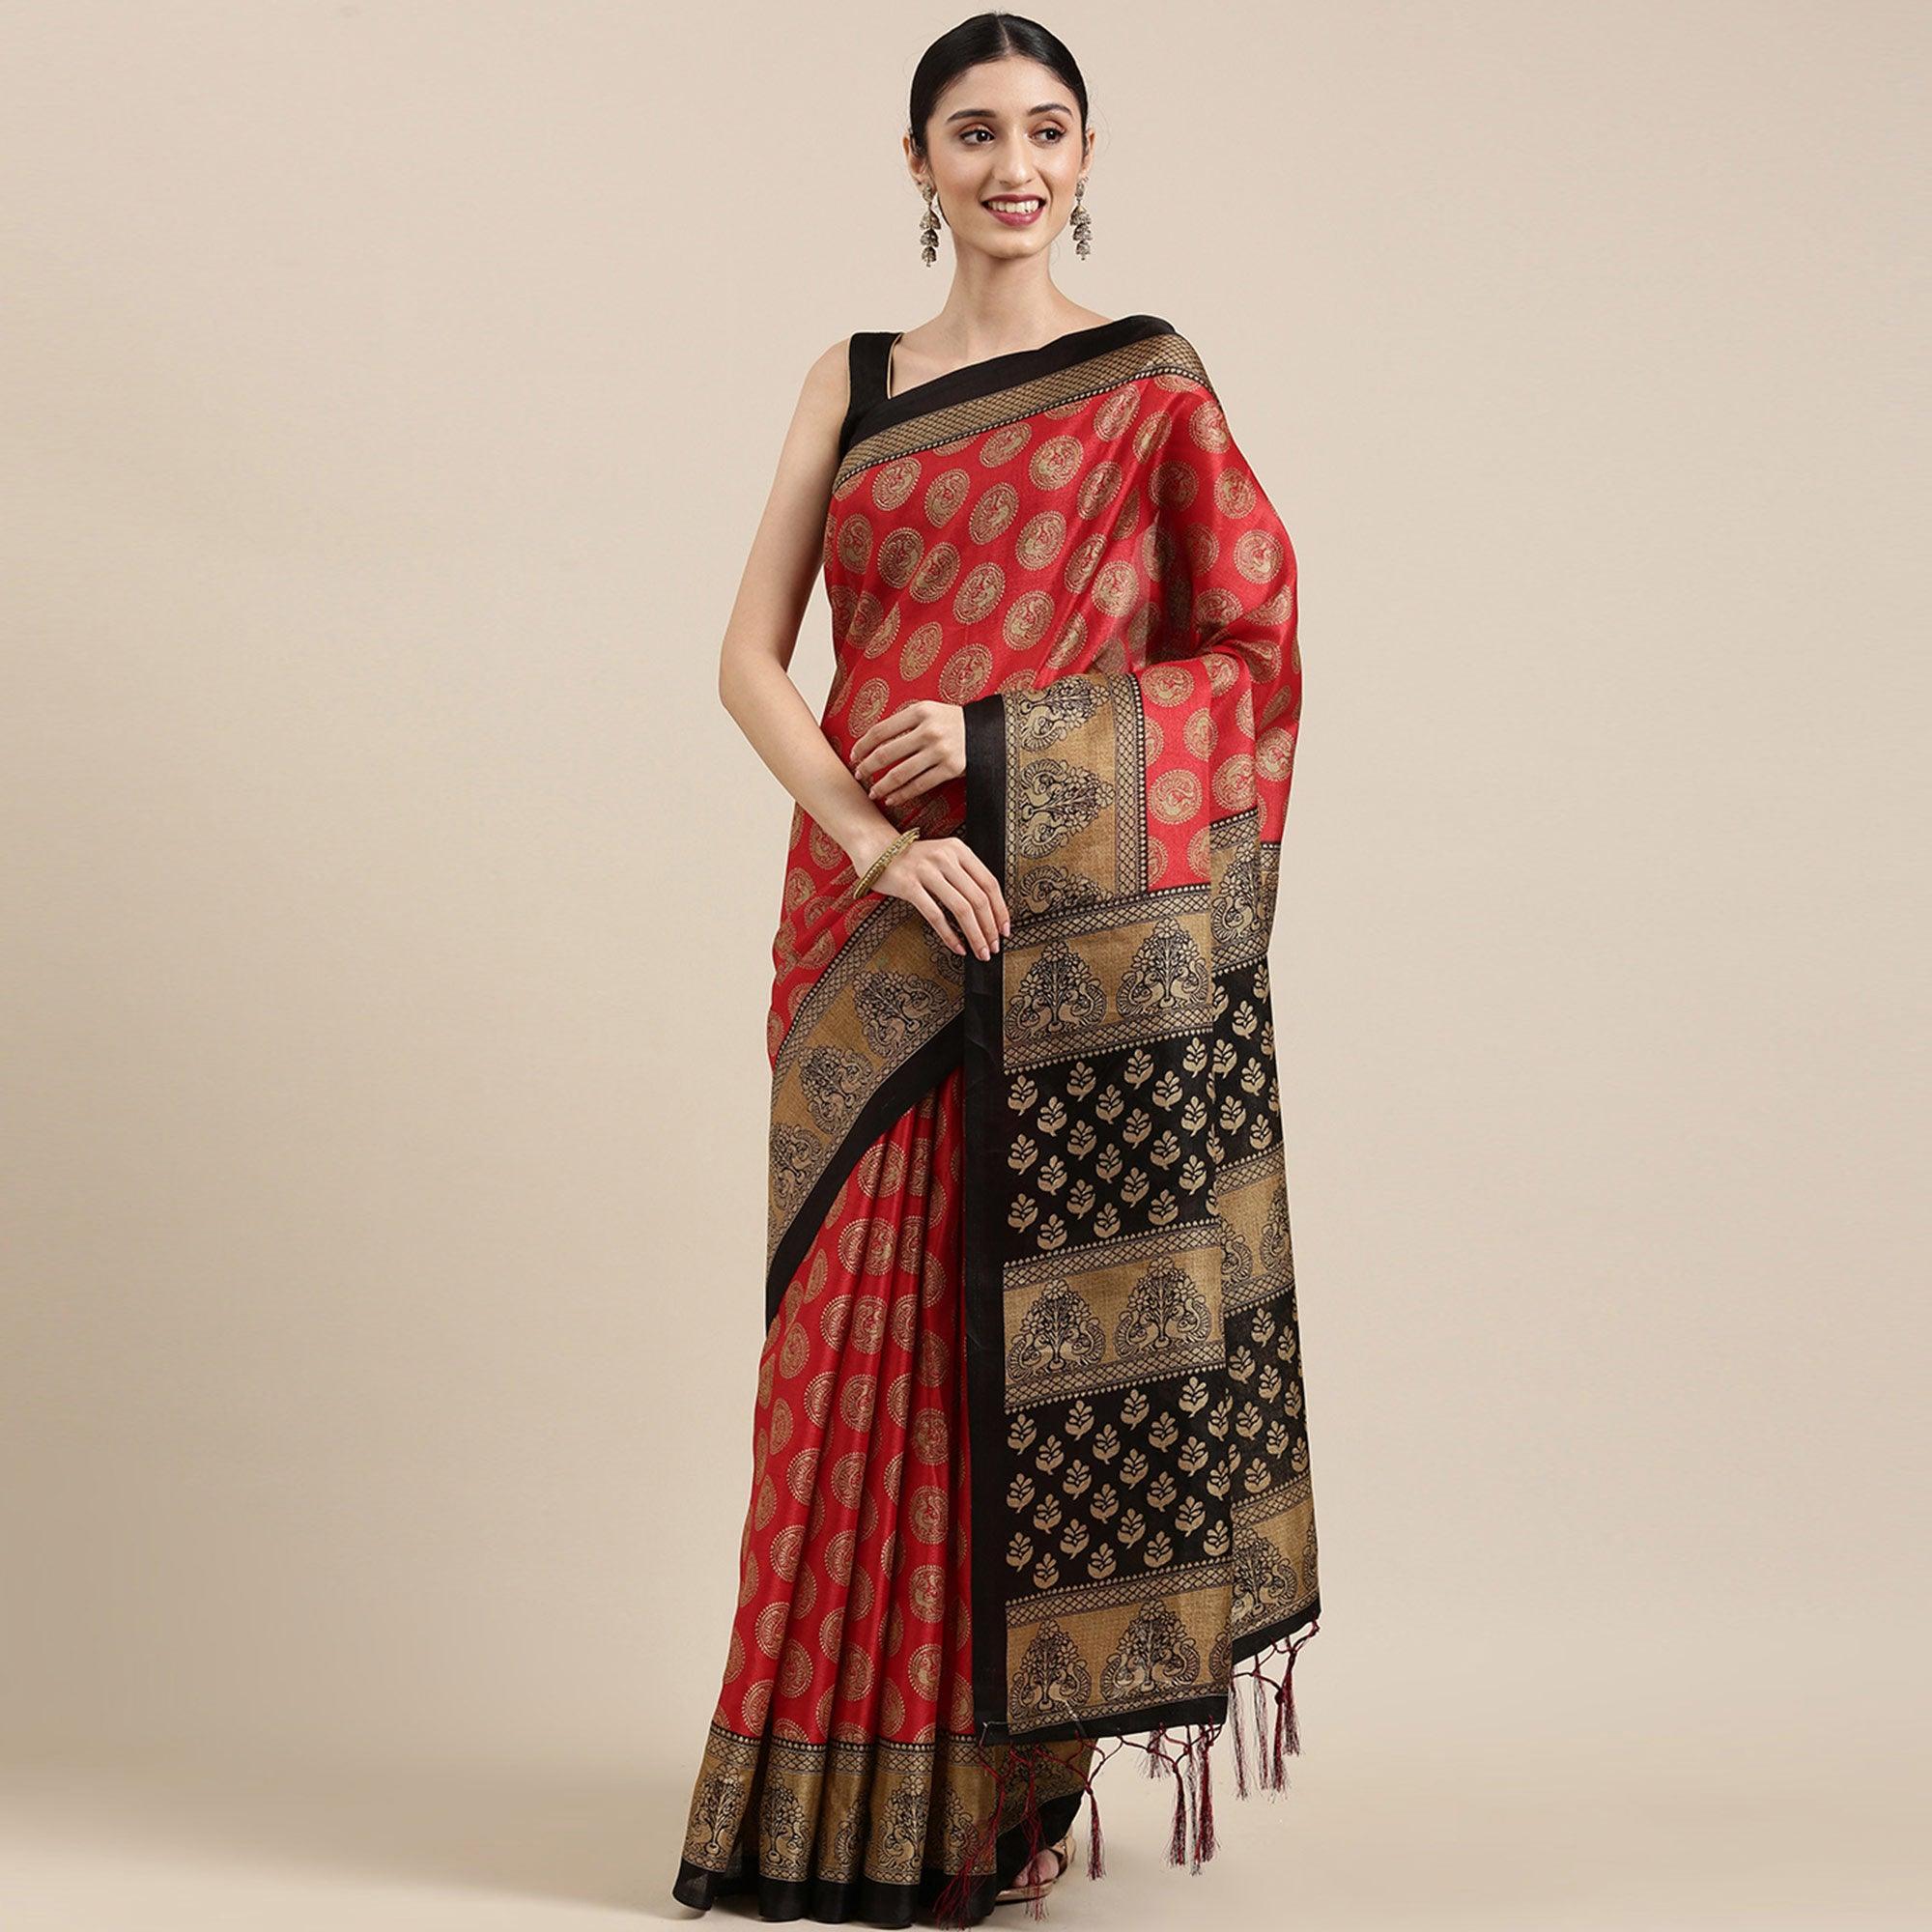 Groovy Red Colored Festive Wear Printed Art Silk Saree With Tassels - Peachmode